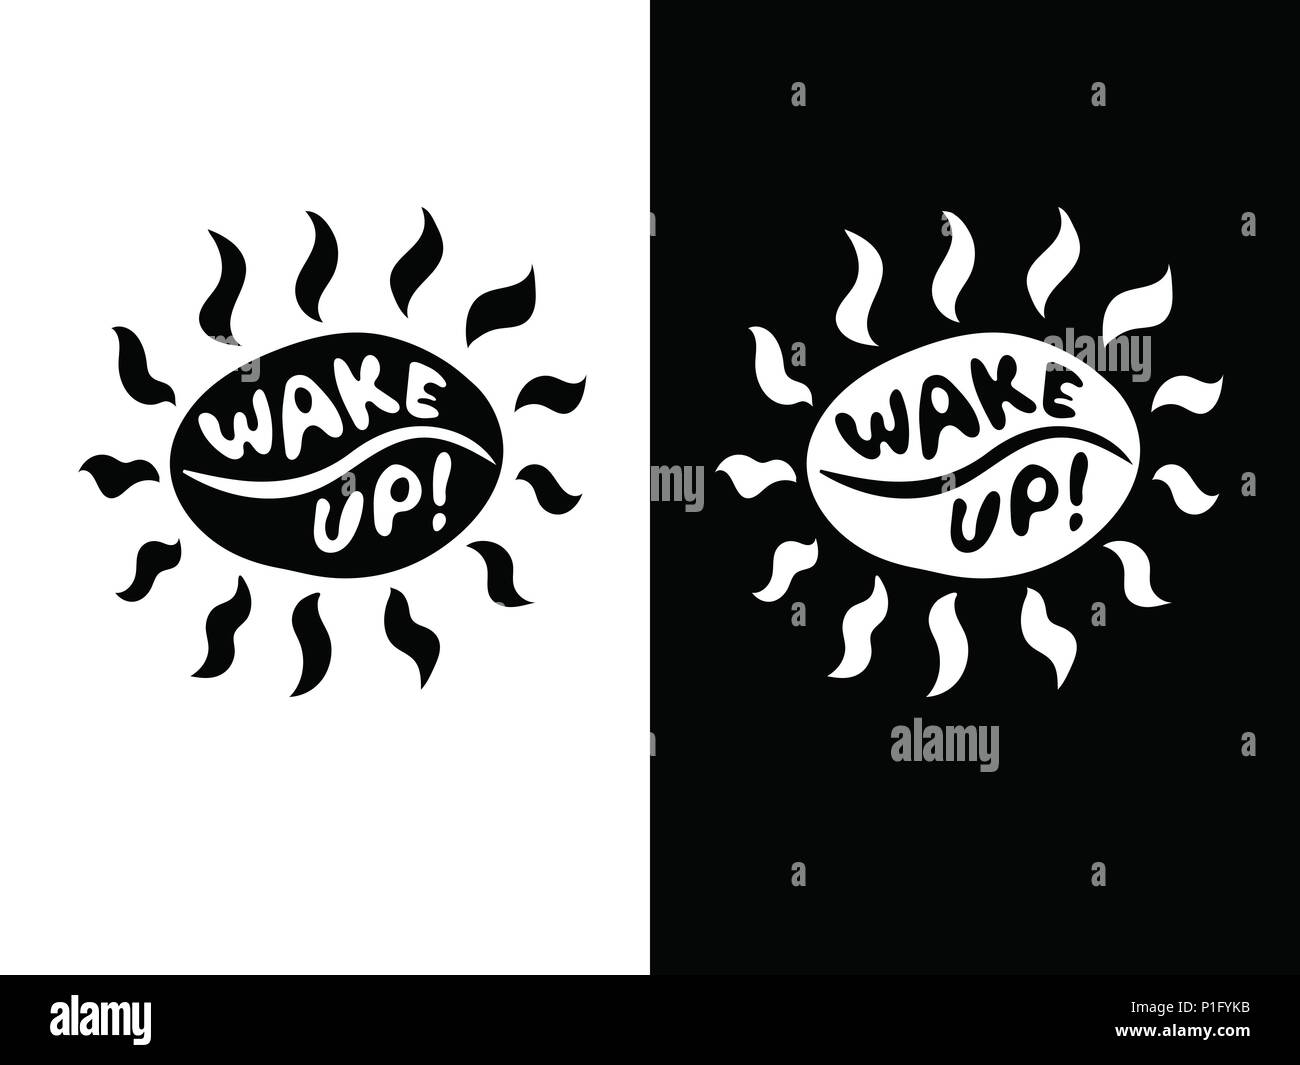 Funny black and white coffee bean sun with beams icon with lettering Wake up! Stock Vector